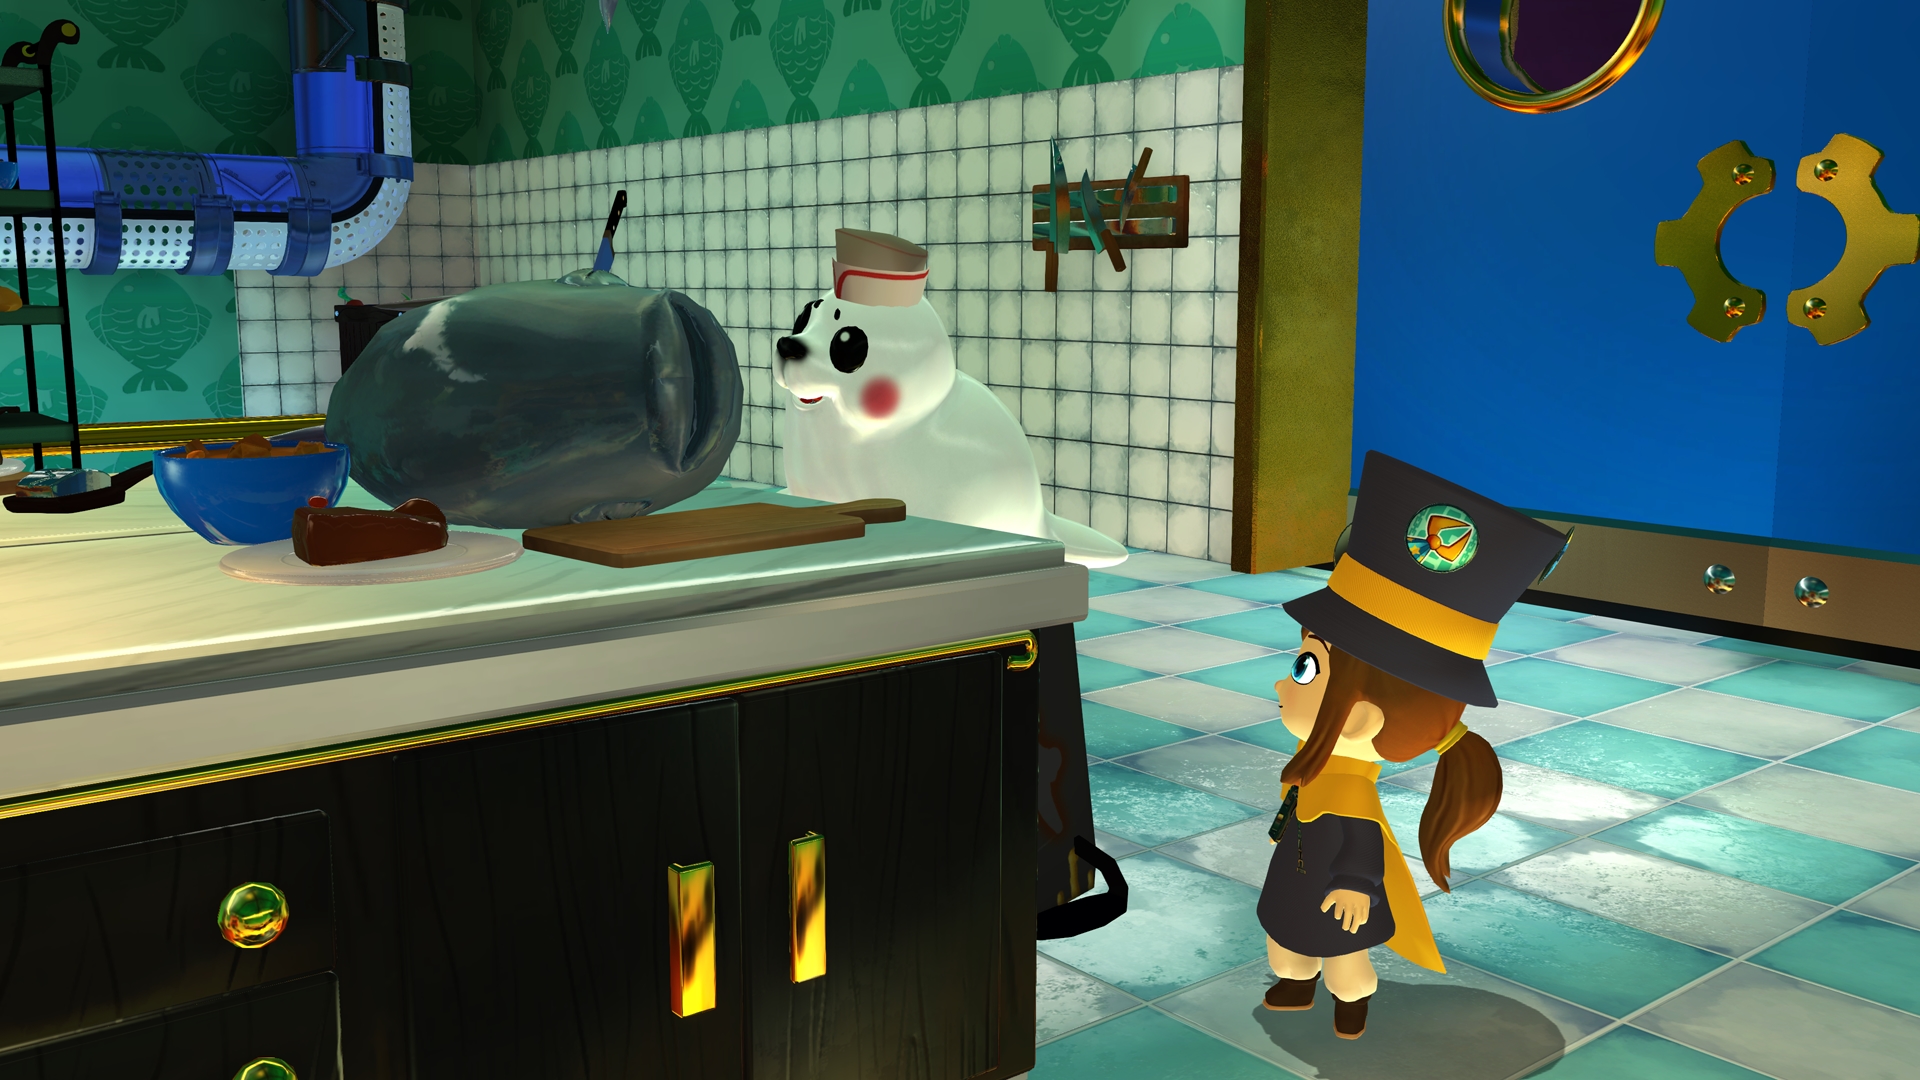 A Hat In Time Seal The Deal DLC. Rock Paper Shotgun